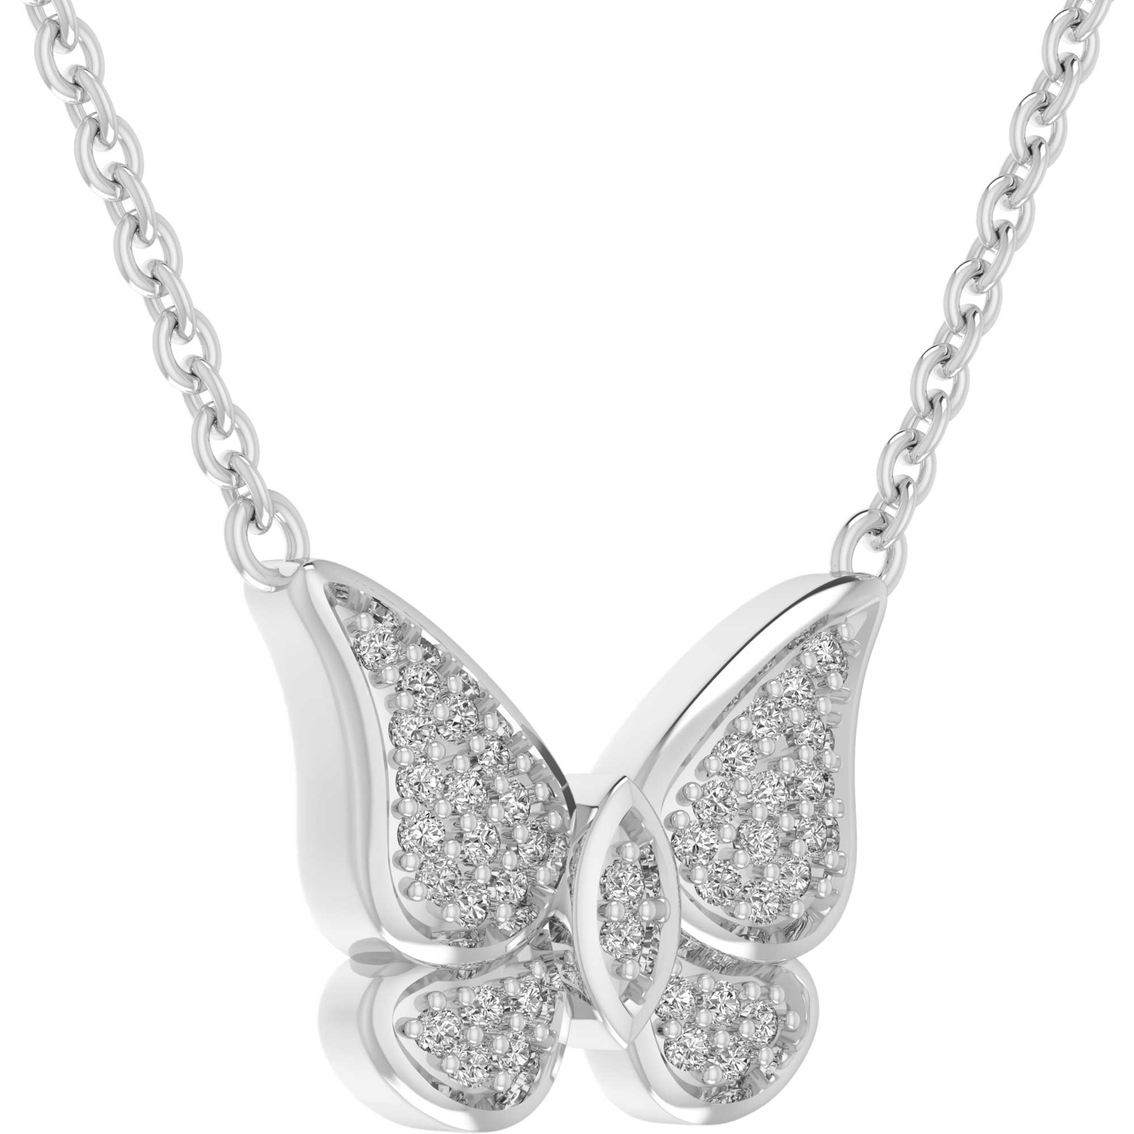 Sterling Silver 1/10 CTW Diamond Butterfly Necklaces - Image 2 of 3